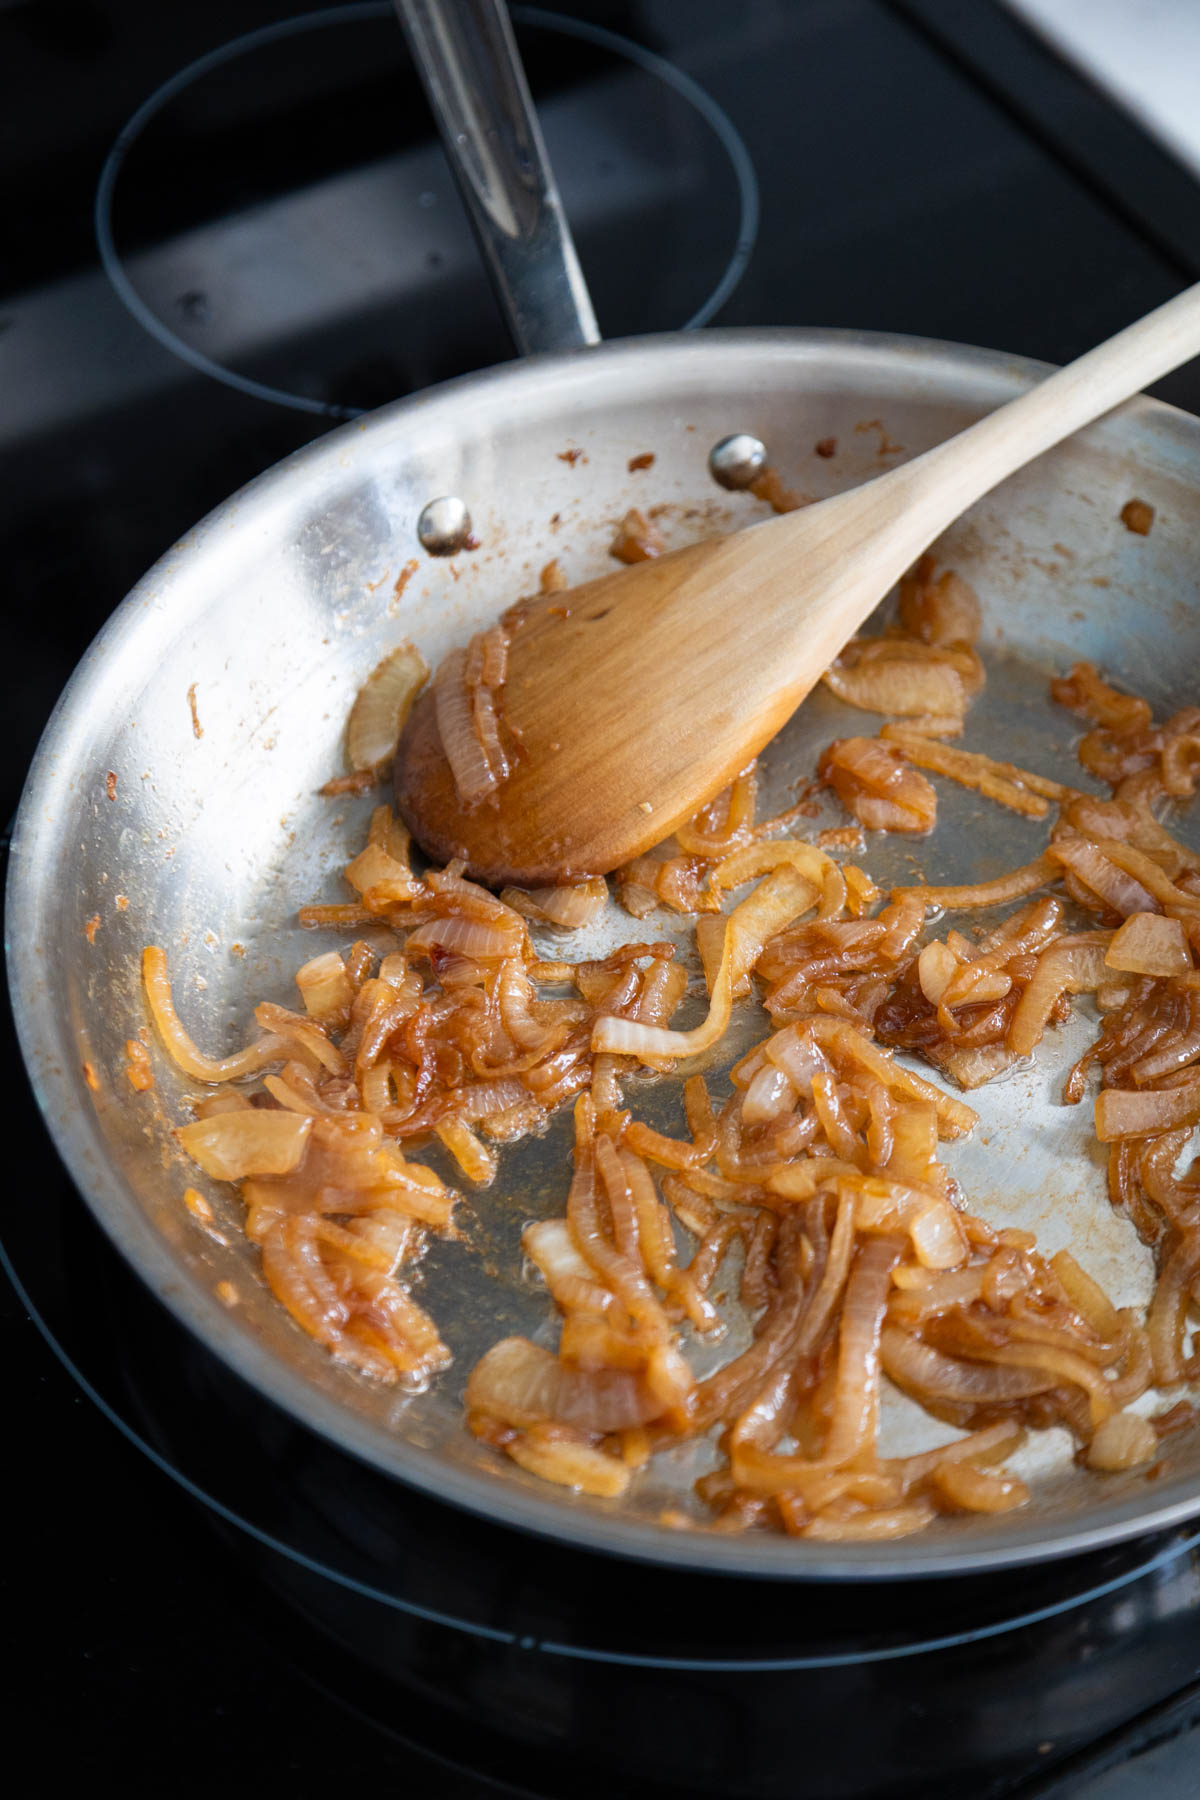 The finished onions are in a skillet being stirred by a wooden spoon.